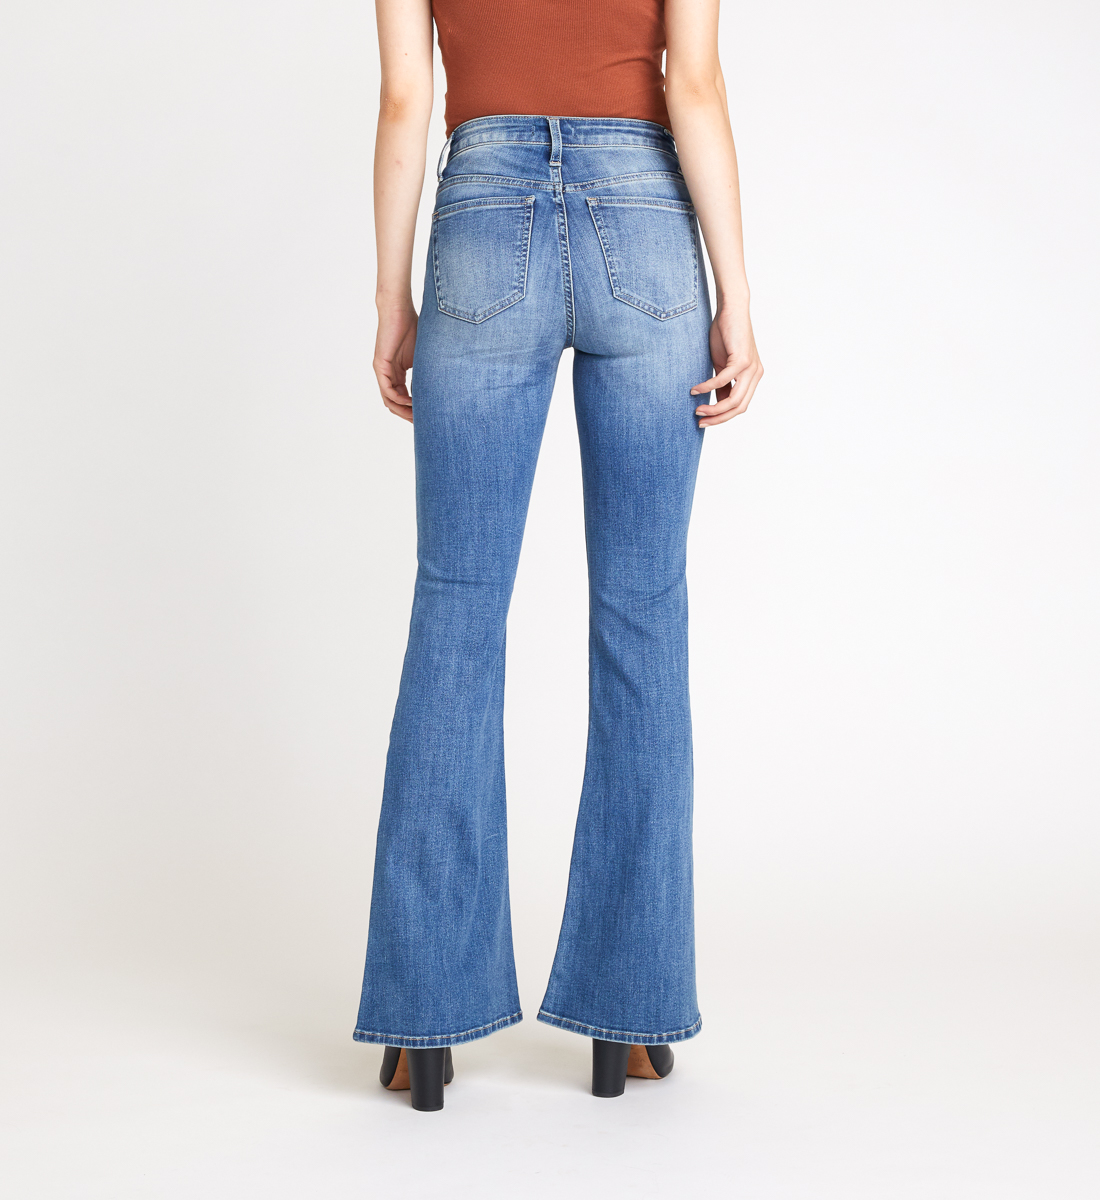 High Note High Rise Flare Leg Jeans - Silver Jeans US